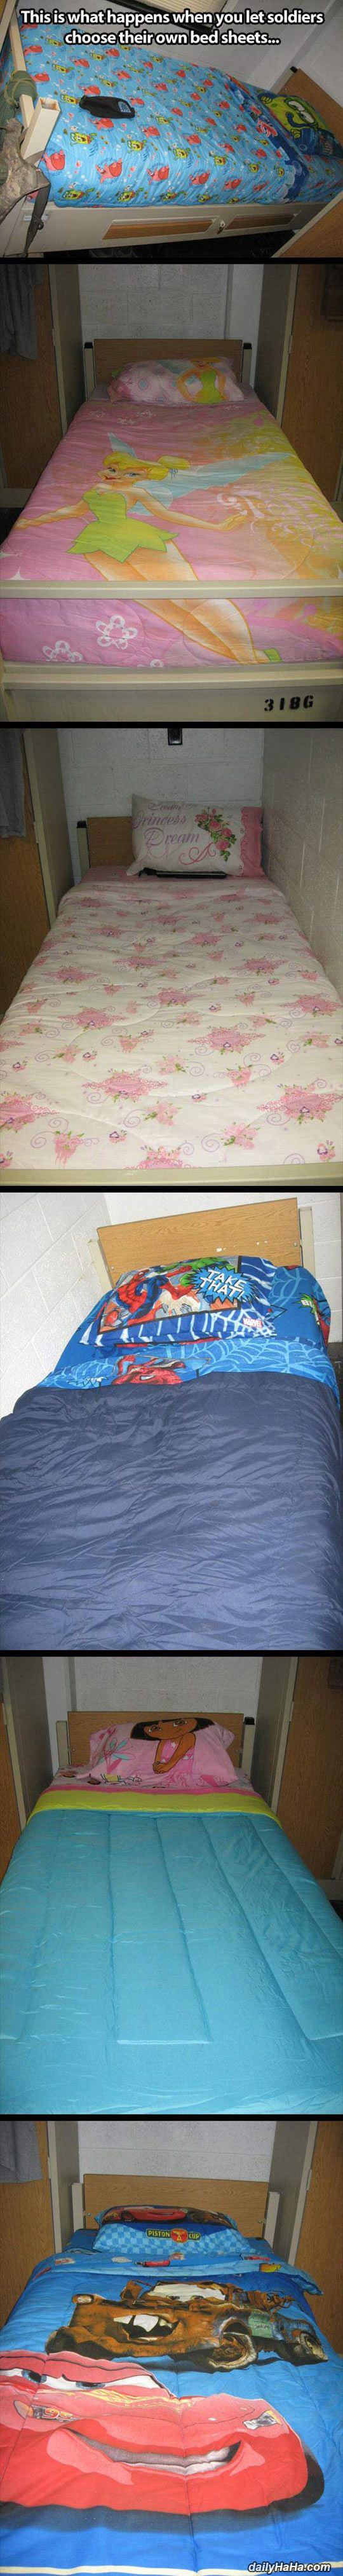 soldiers bed sheets funny picture